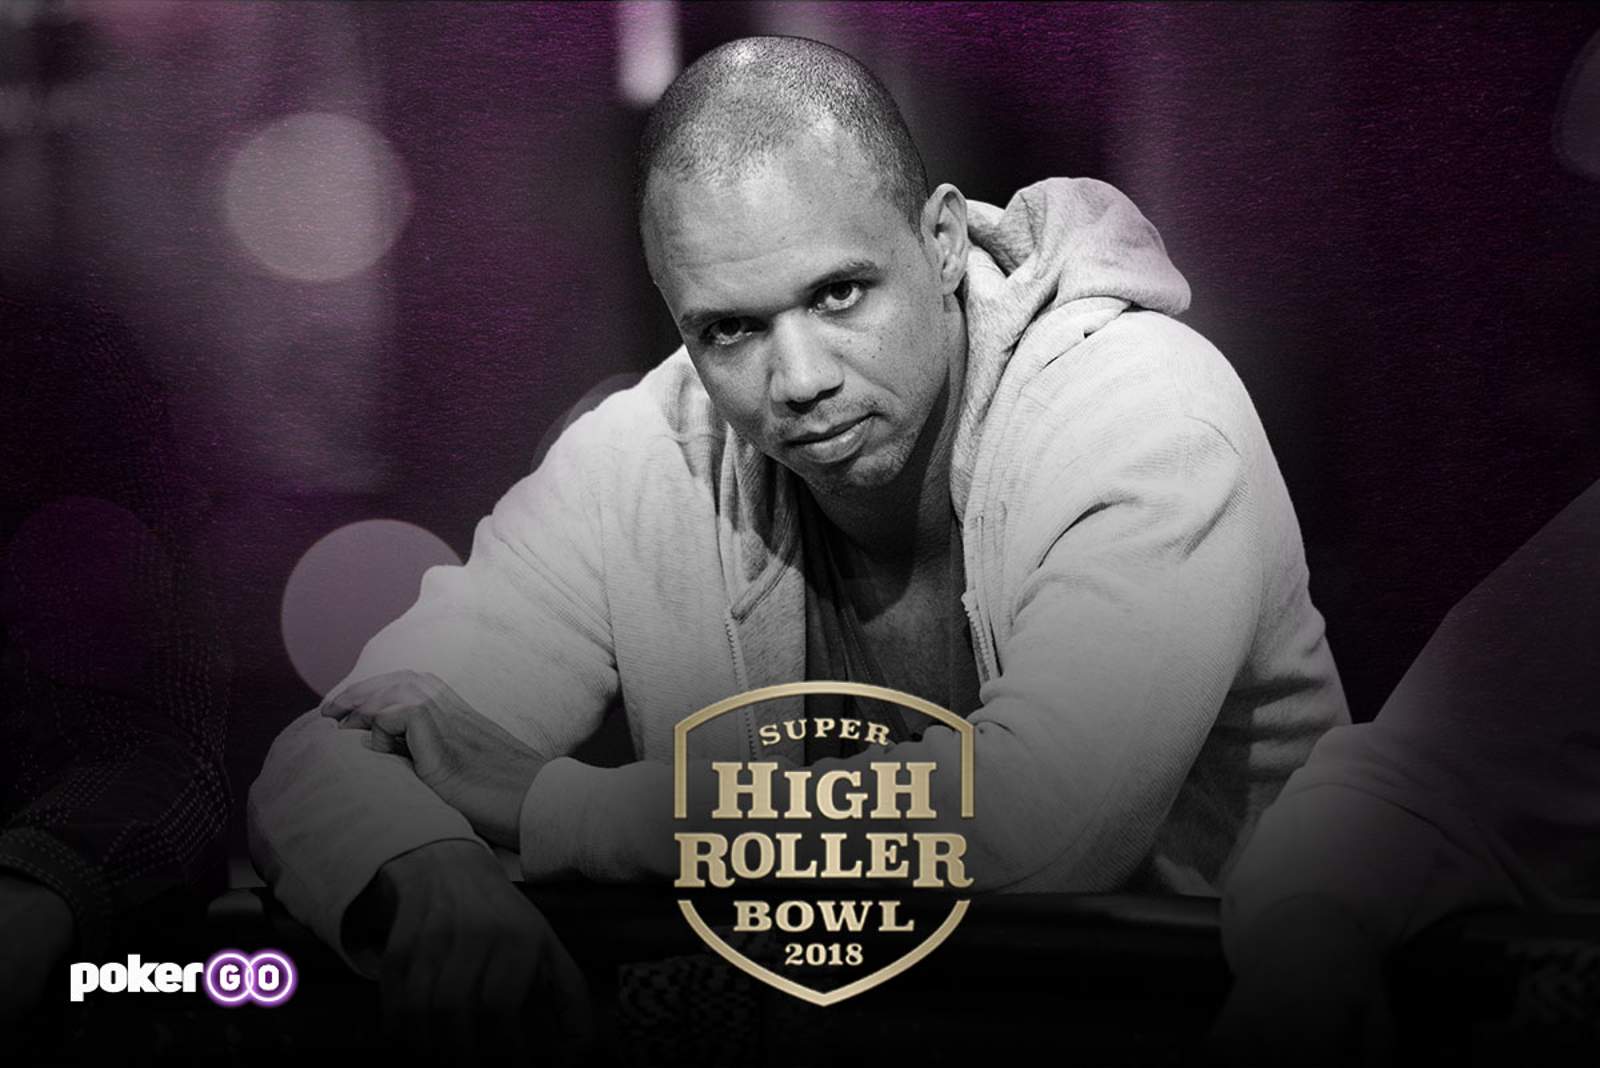 Has Phil Ivey’s Magic Worn Off? Mike McDonald Discusses Super High Roller Bowl Odds